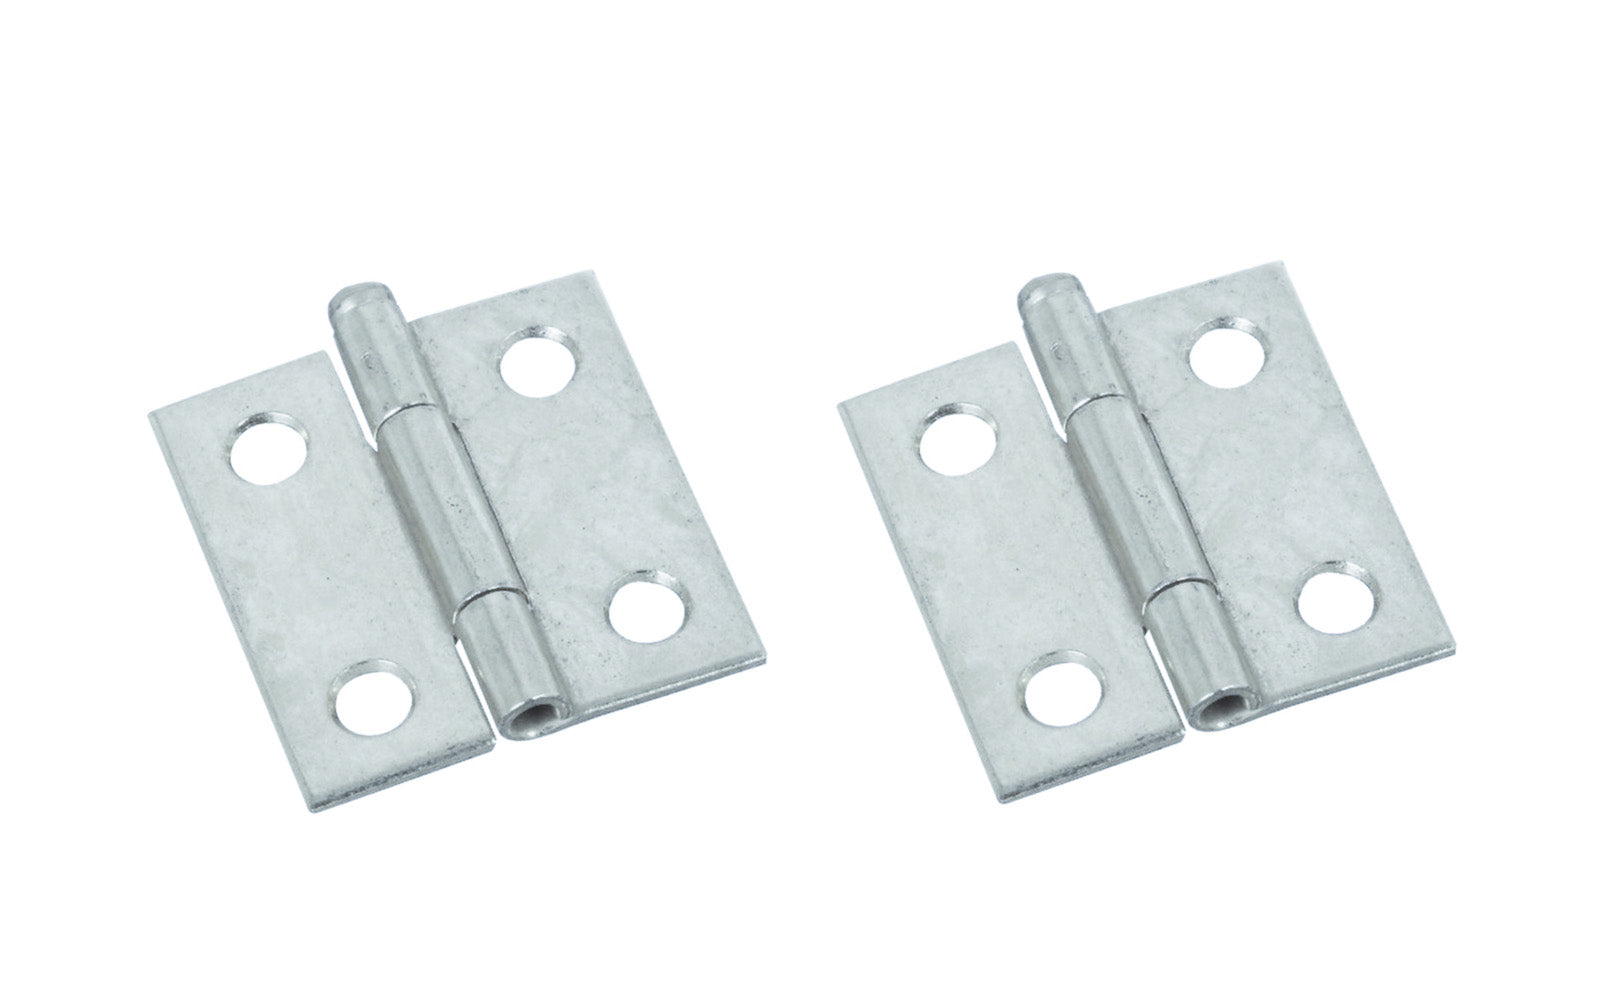 1-1/2" Zinc-Plated Loose-Pin Narrow Hinges - 2 Pack. 1-1/2" high x 1-1/2" wide. Made of cold-rolled steel with zinc plating. Surface mount. Removable pin hinges. Sold as a pair of hinges. National Hardware Model No. N141-739. 038613141735